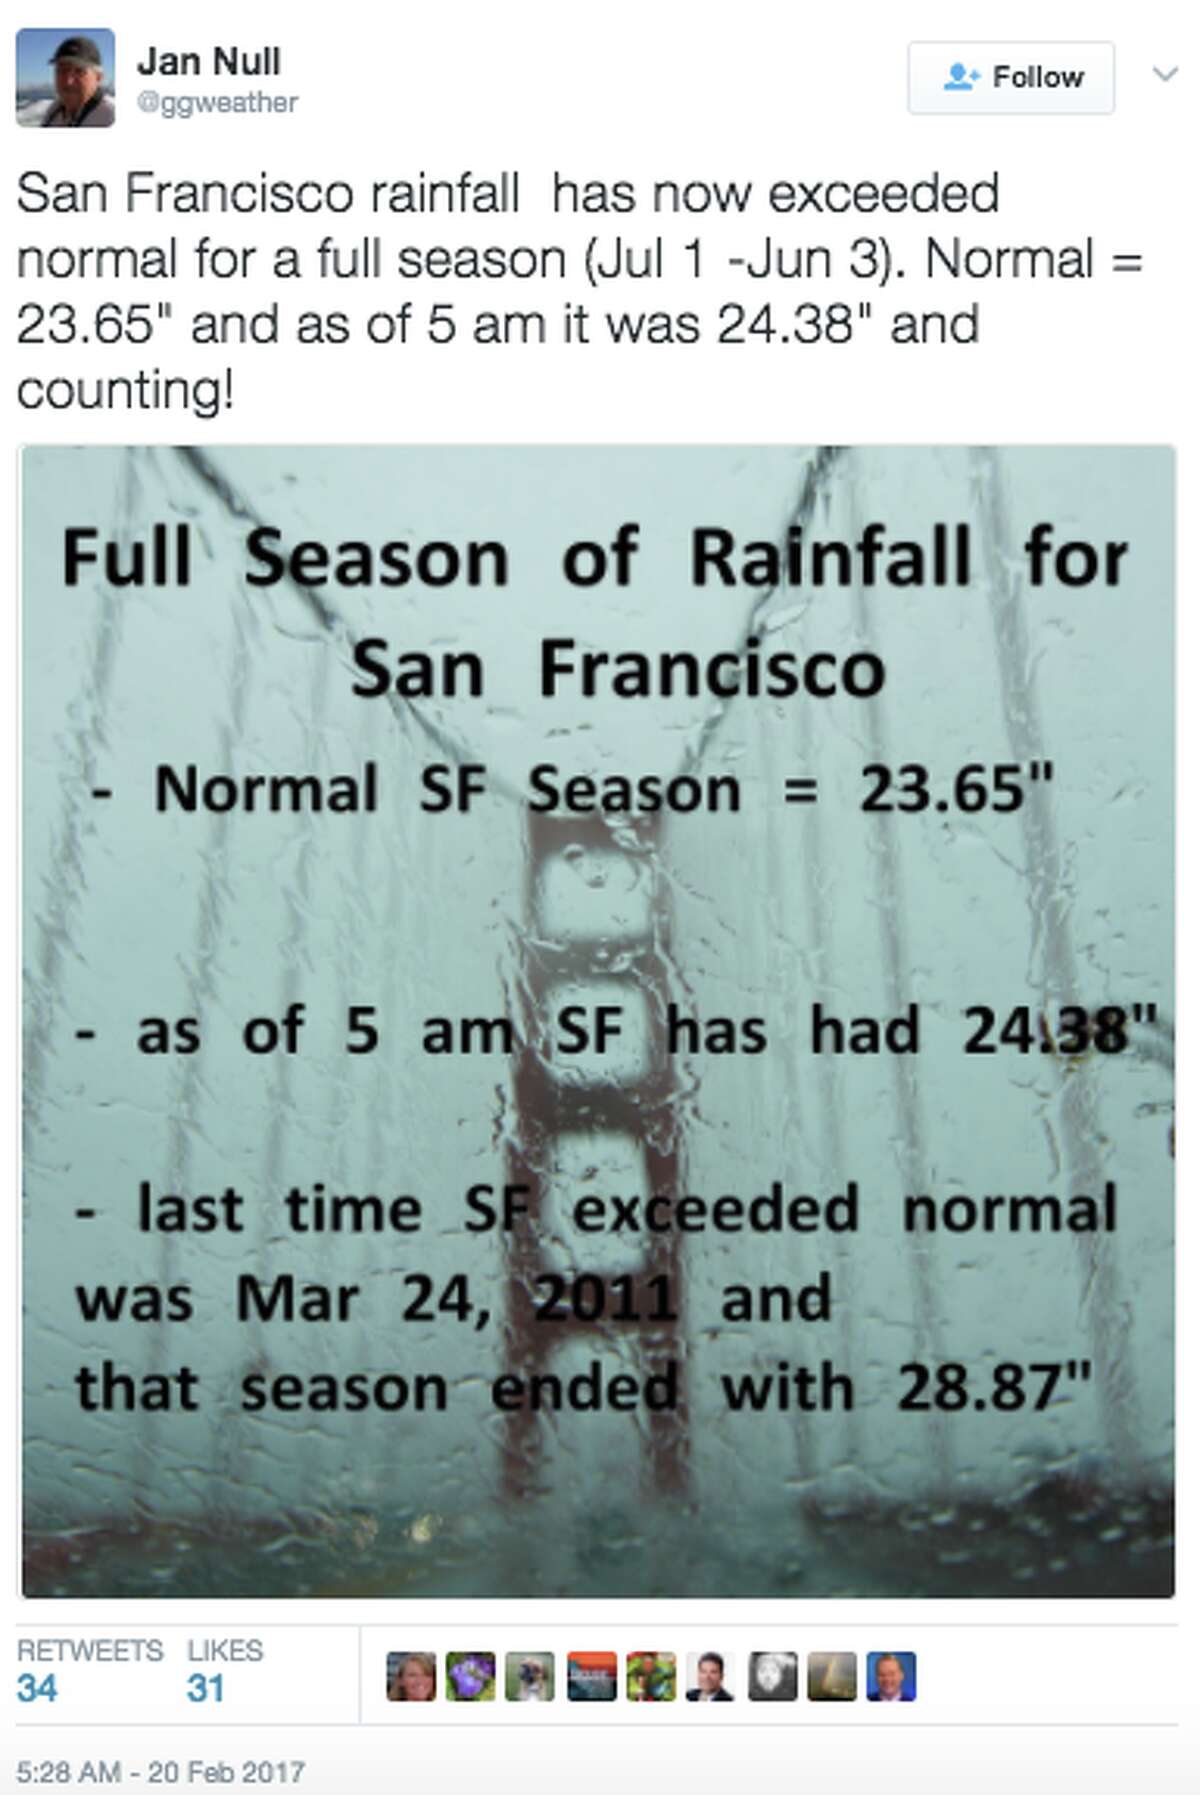 One time use: San Francisco rainfall exceeded normal for a full season as of Feb. 20 at 5 a.m. 